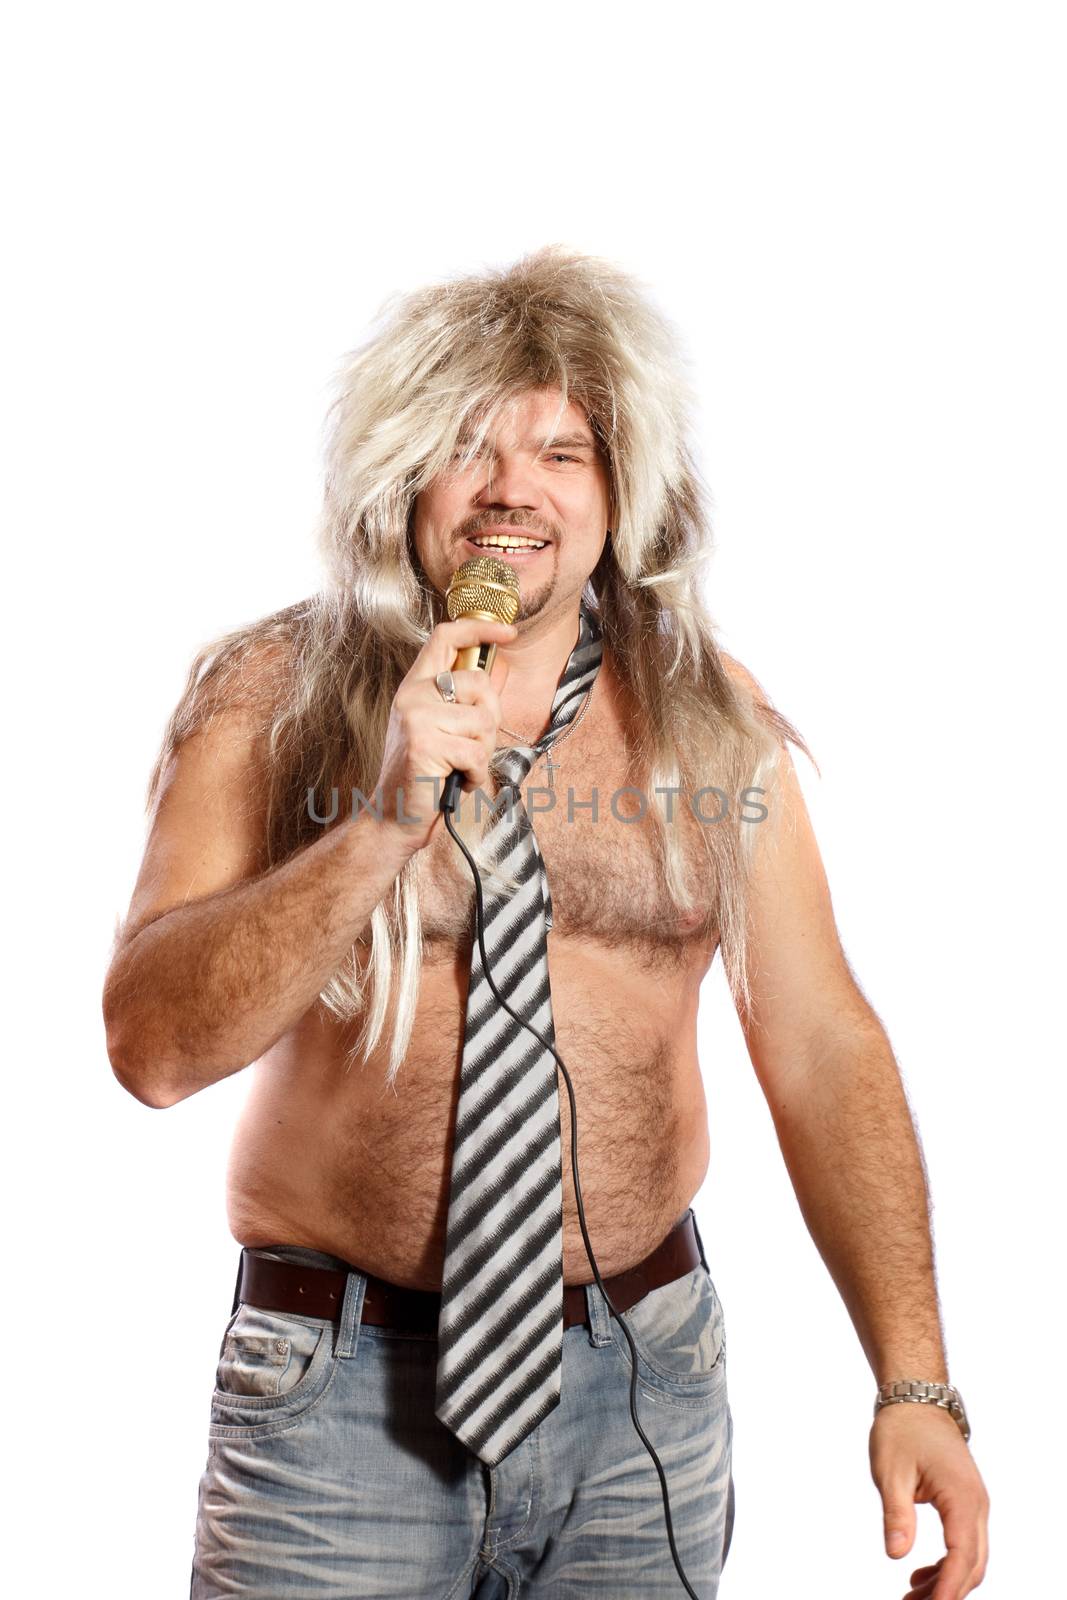 old-time rock star with a microphone on a white background